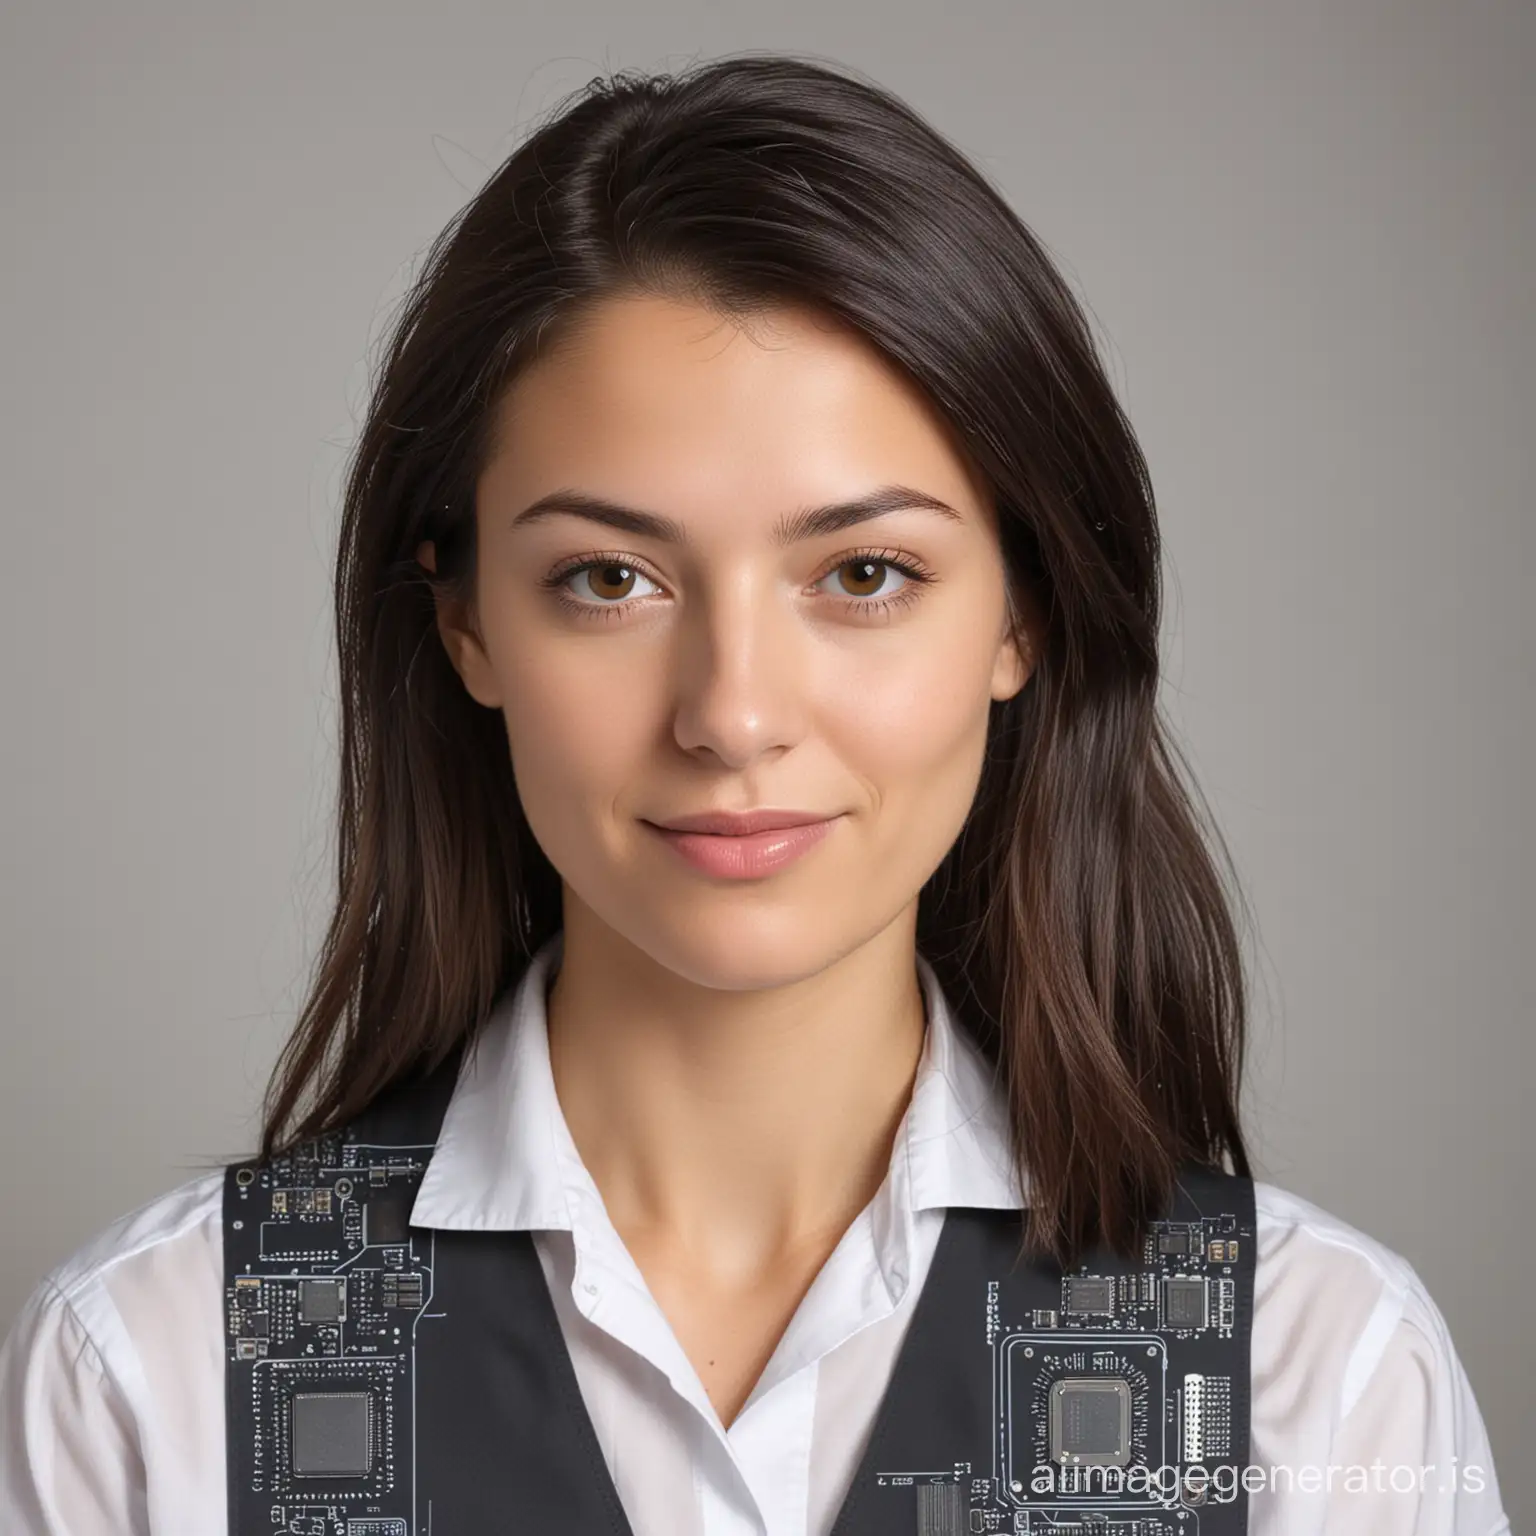 Generate me an image of a female computer engineer